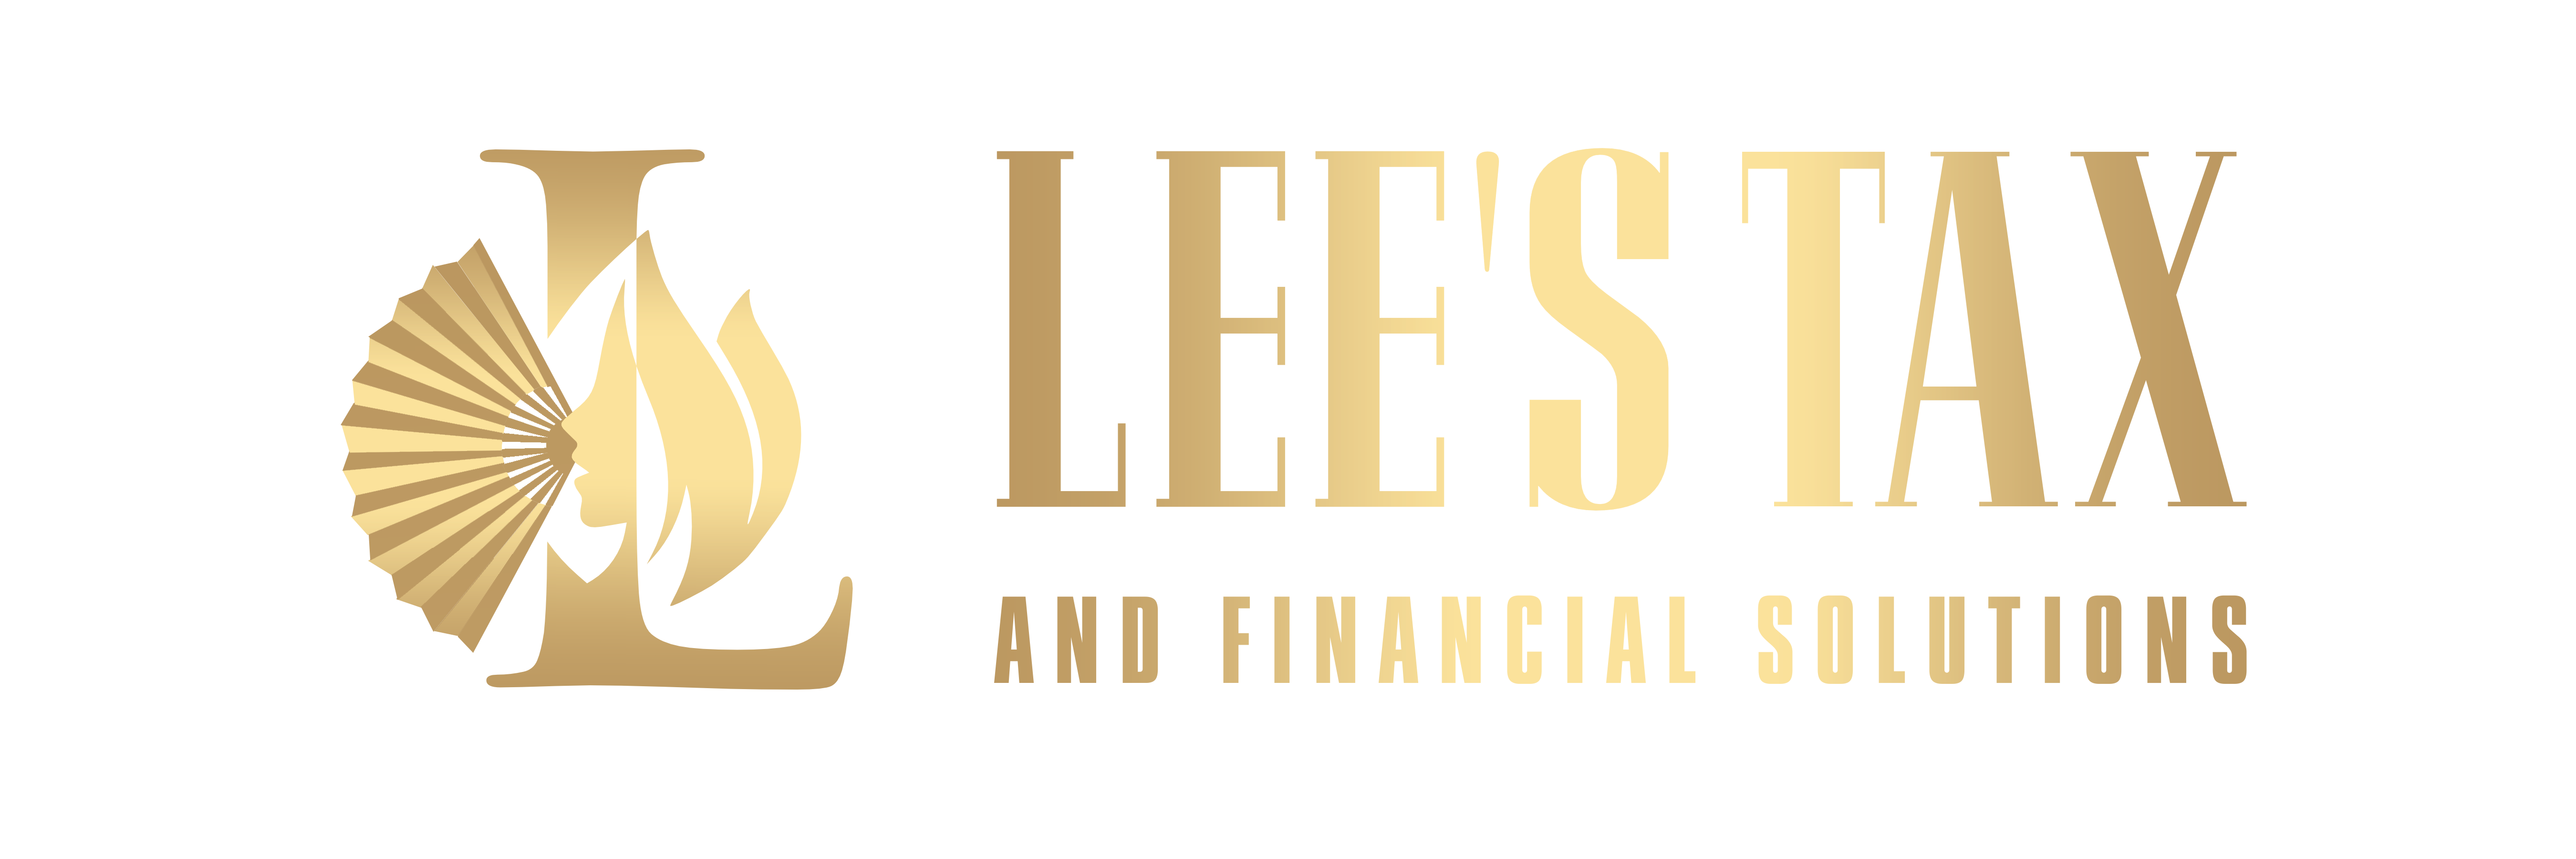 Tax Accounting Services Lee s Tax Service